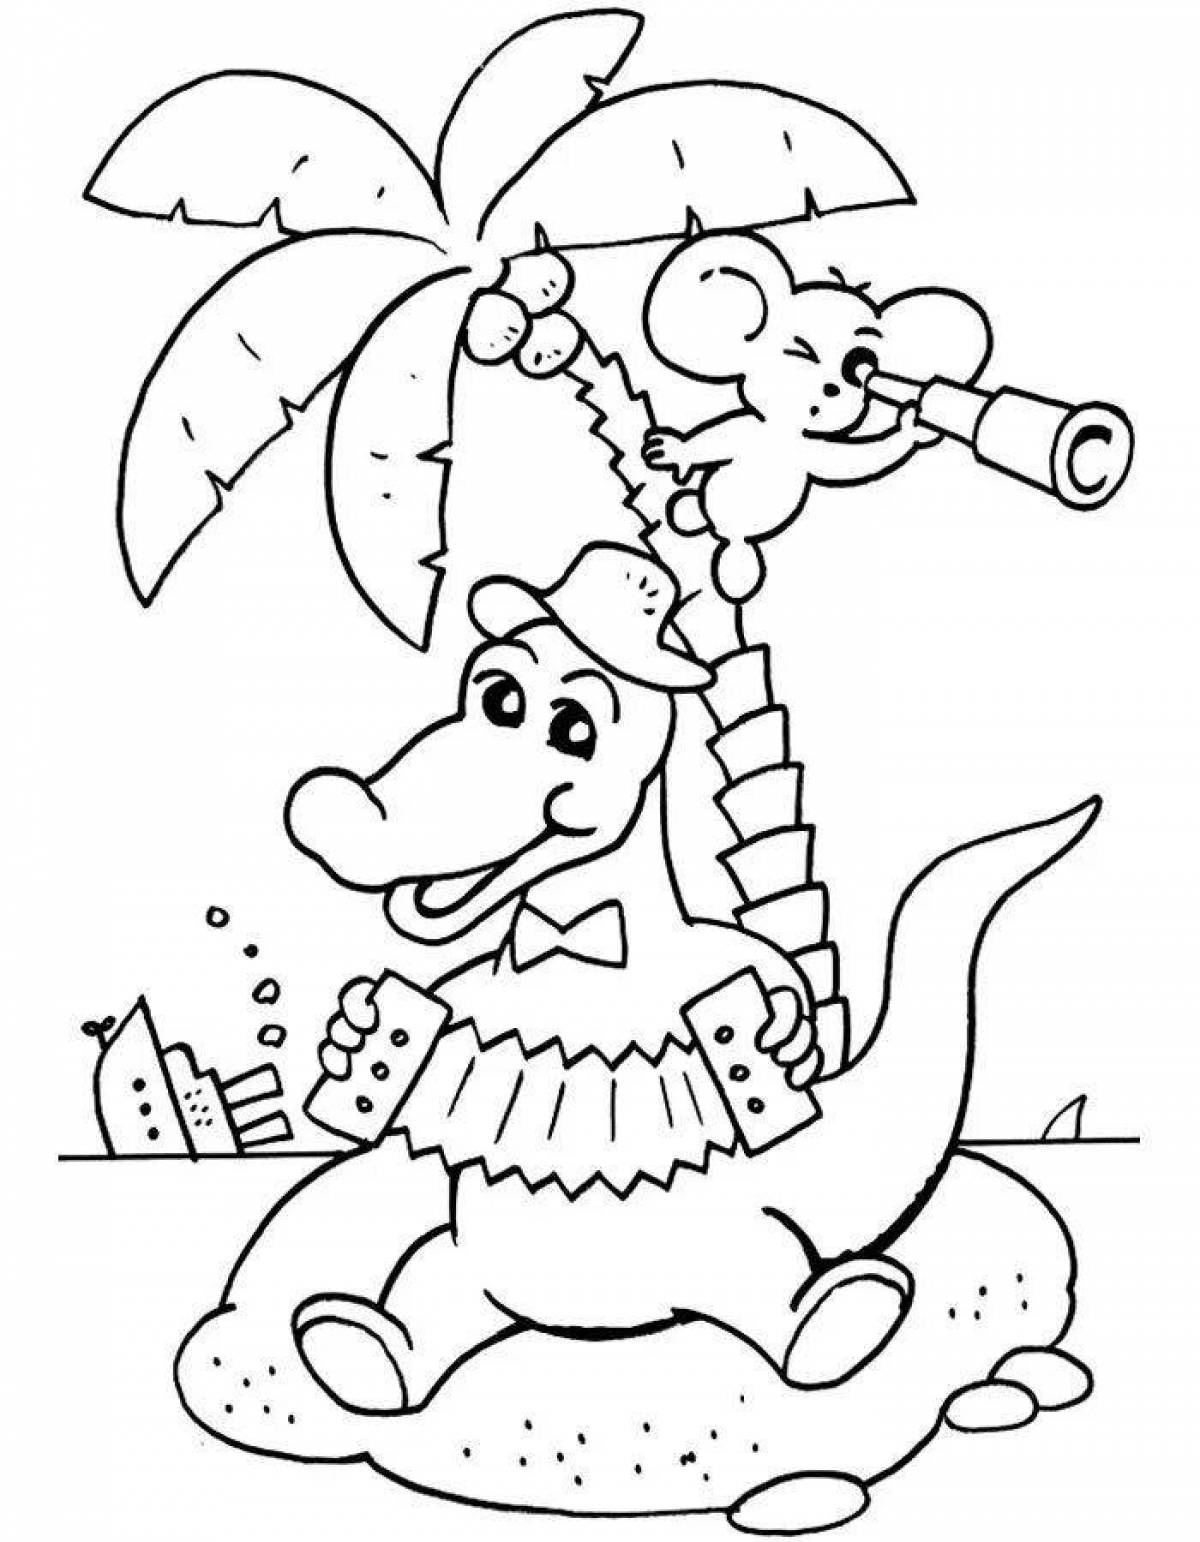 Coloring page funny genie